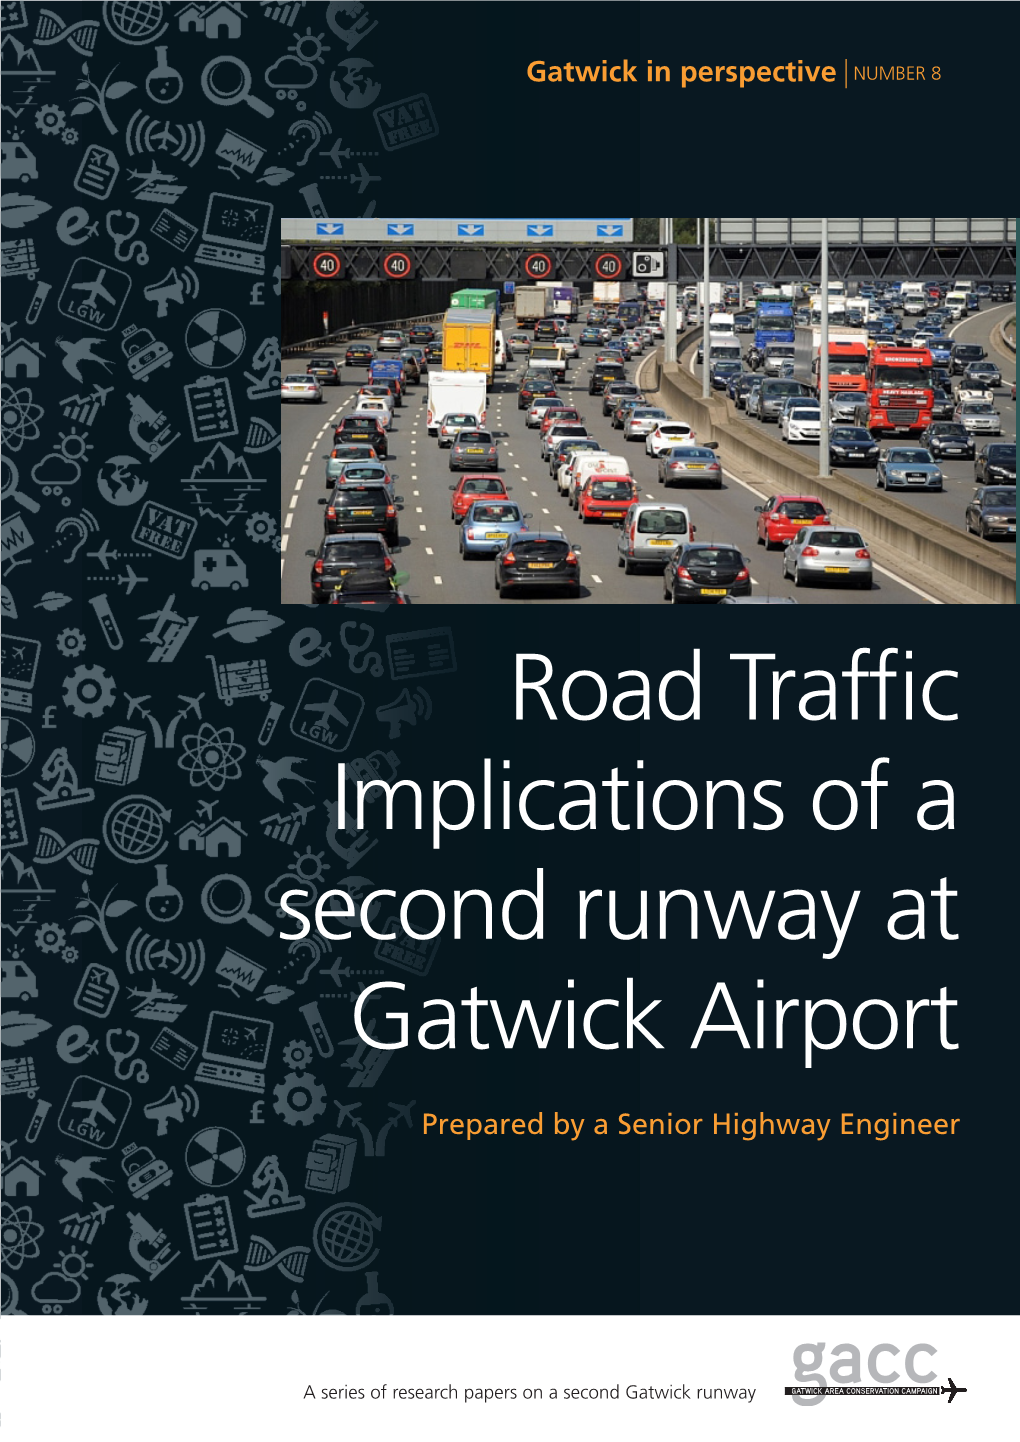 Road Traffic Implications of a Second Runway at Gatwick Airport